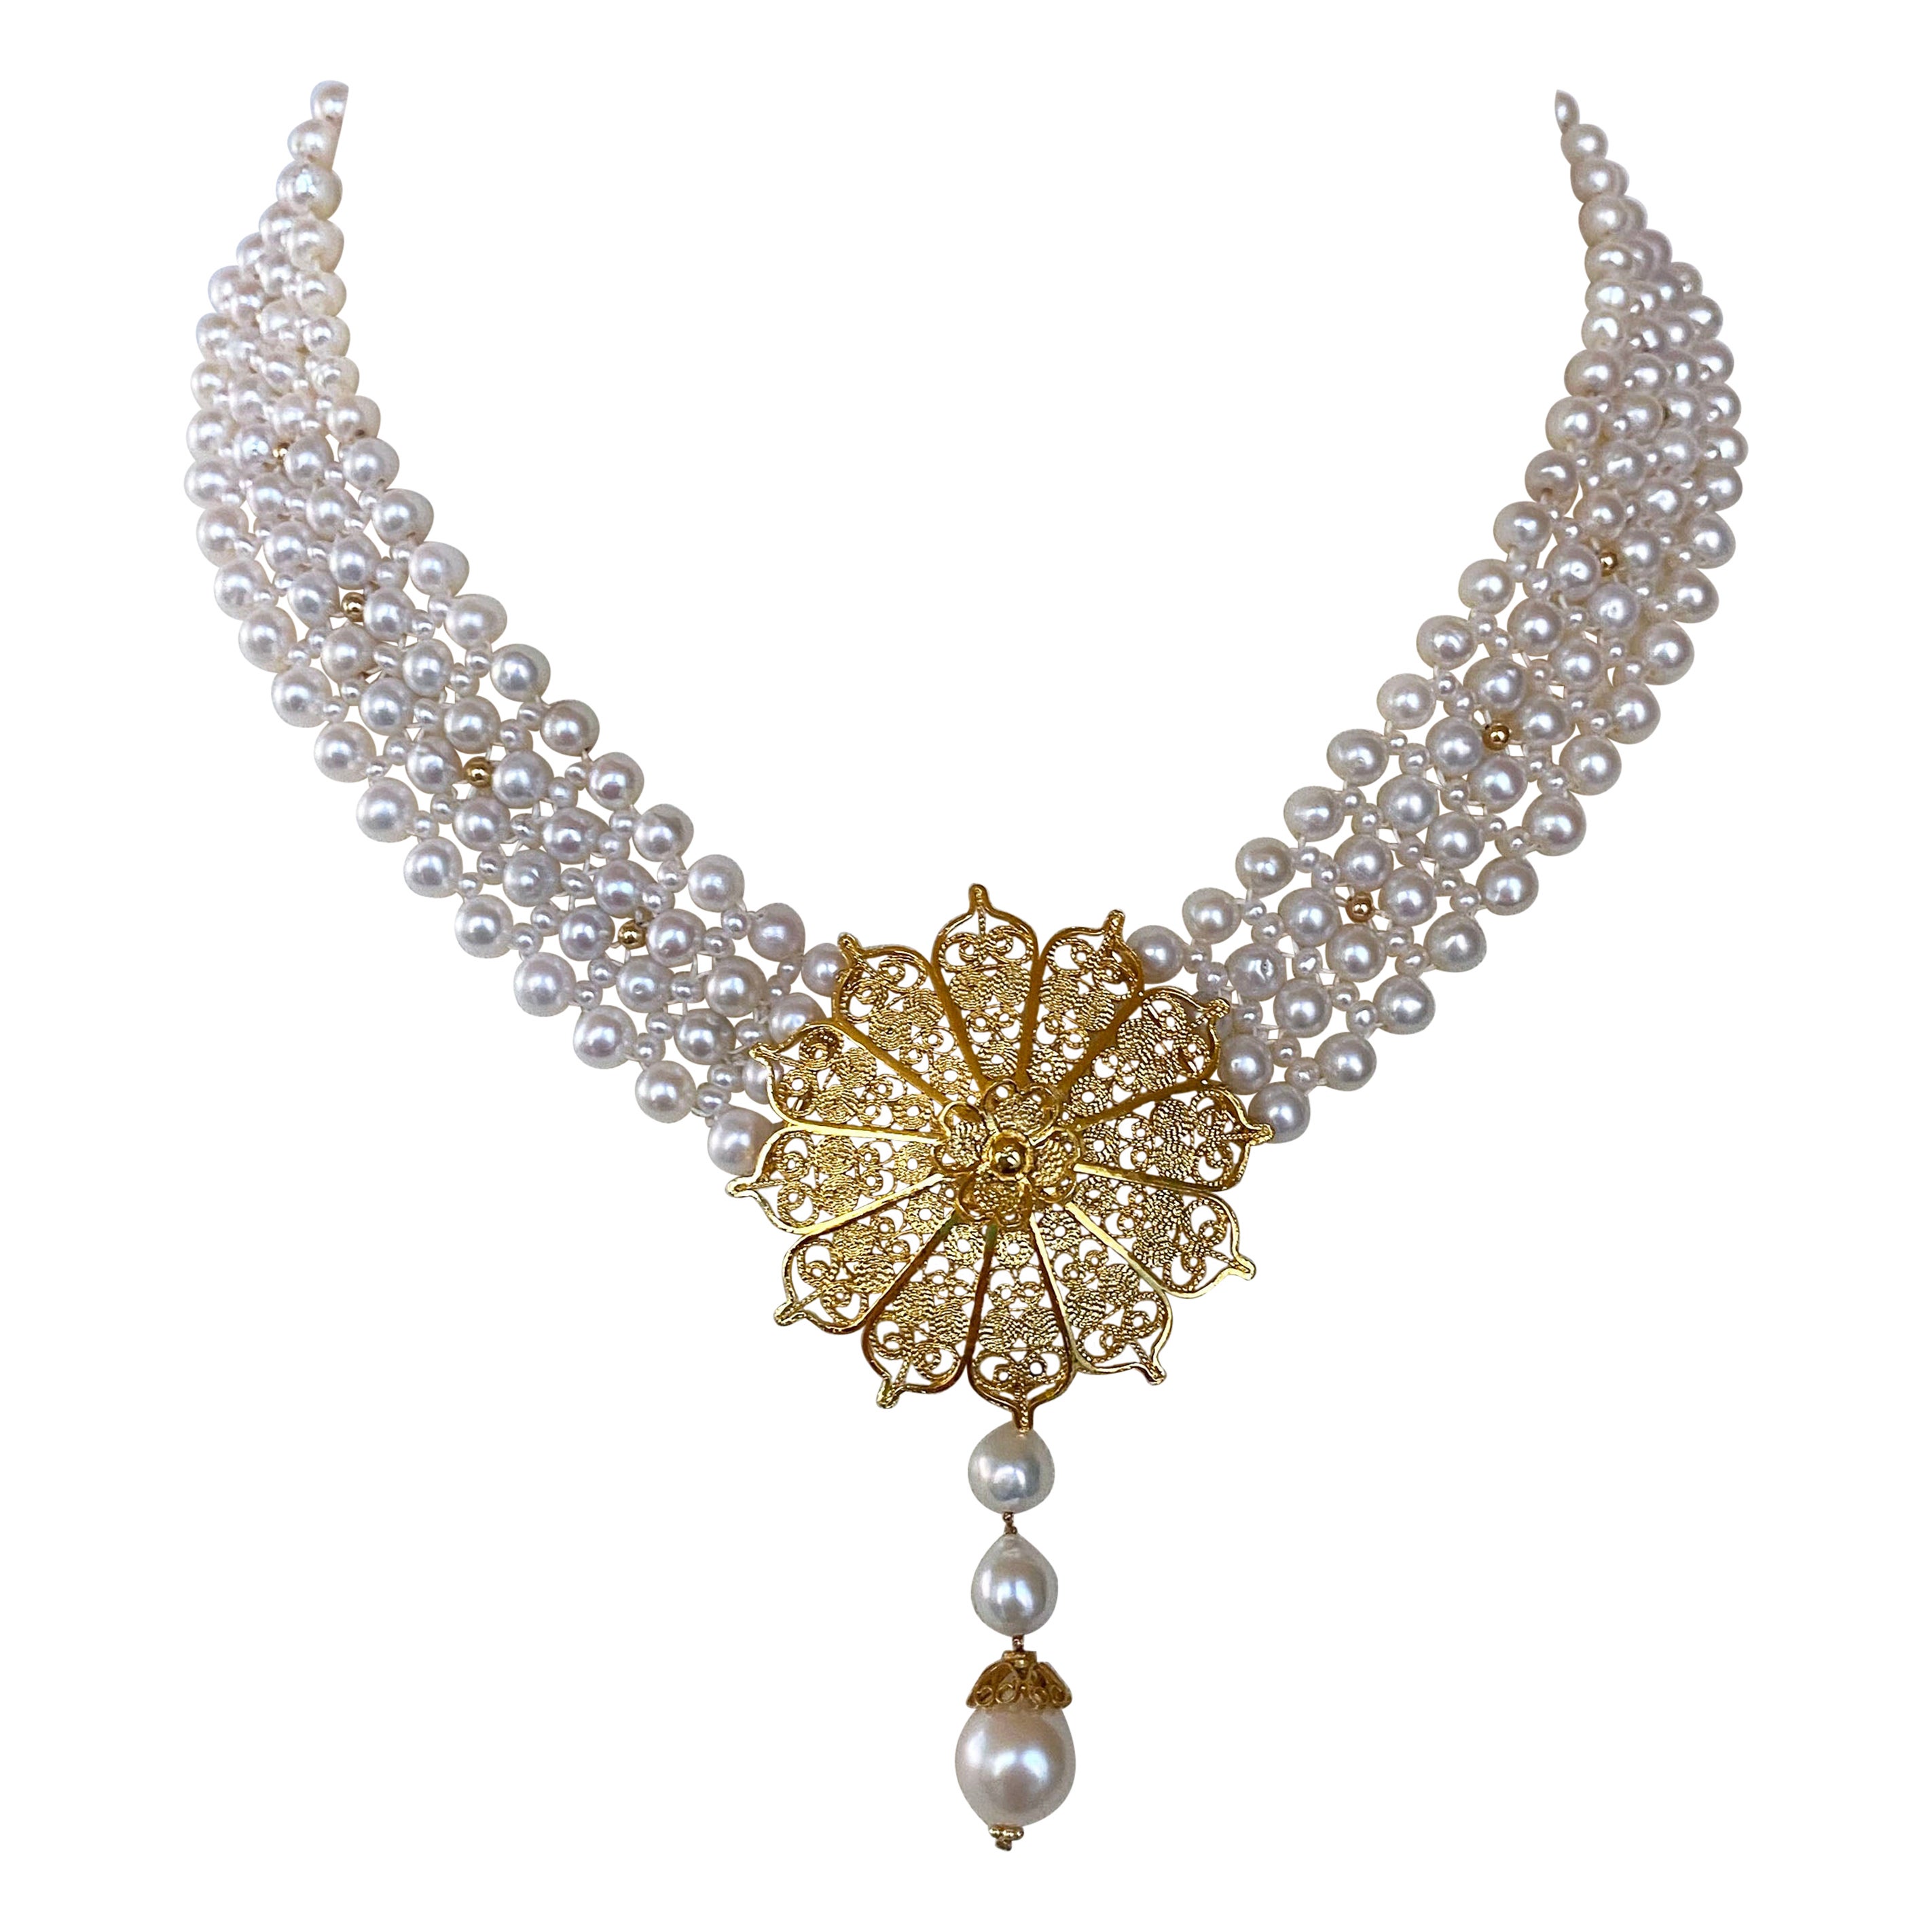 Marina J. Pearl Woven Necklace with 18k Yellow Gold Plated Floral Centerpiece